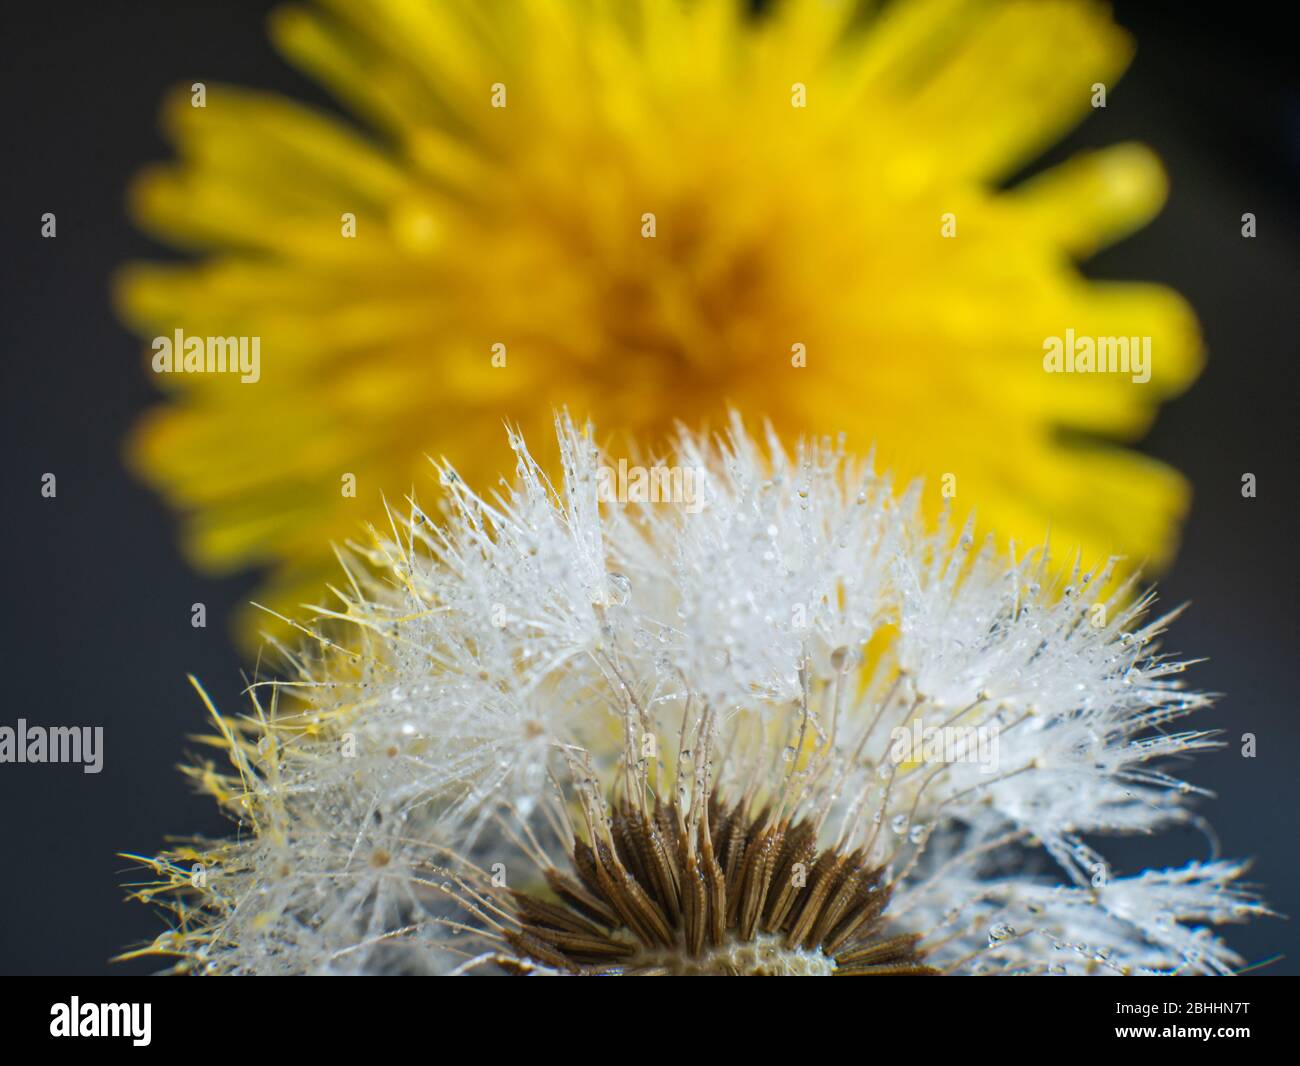 The detail of the seed and parachute in front of a Dandelion flower Stock Photo